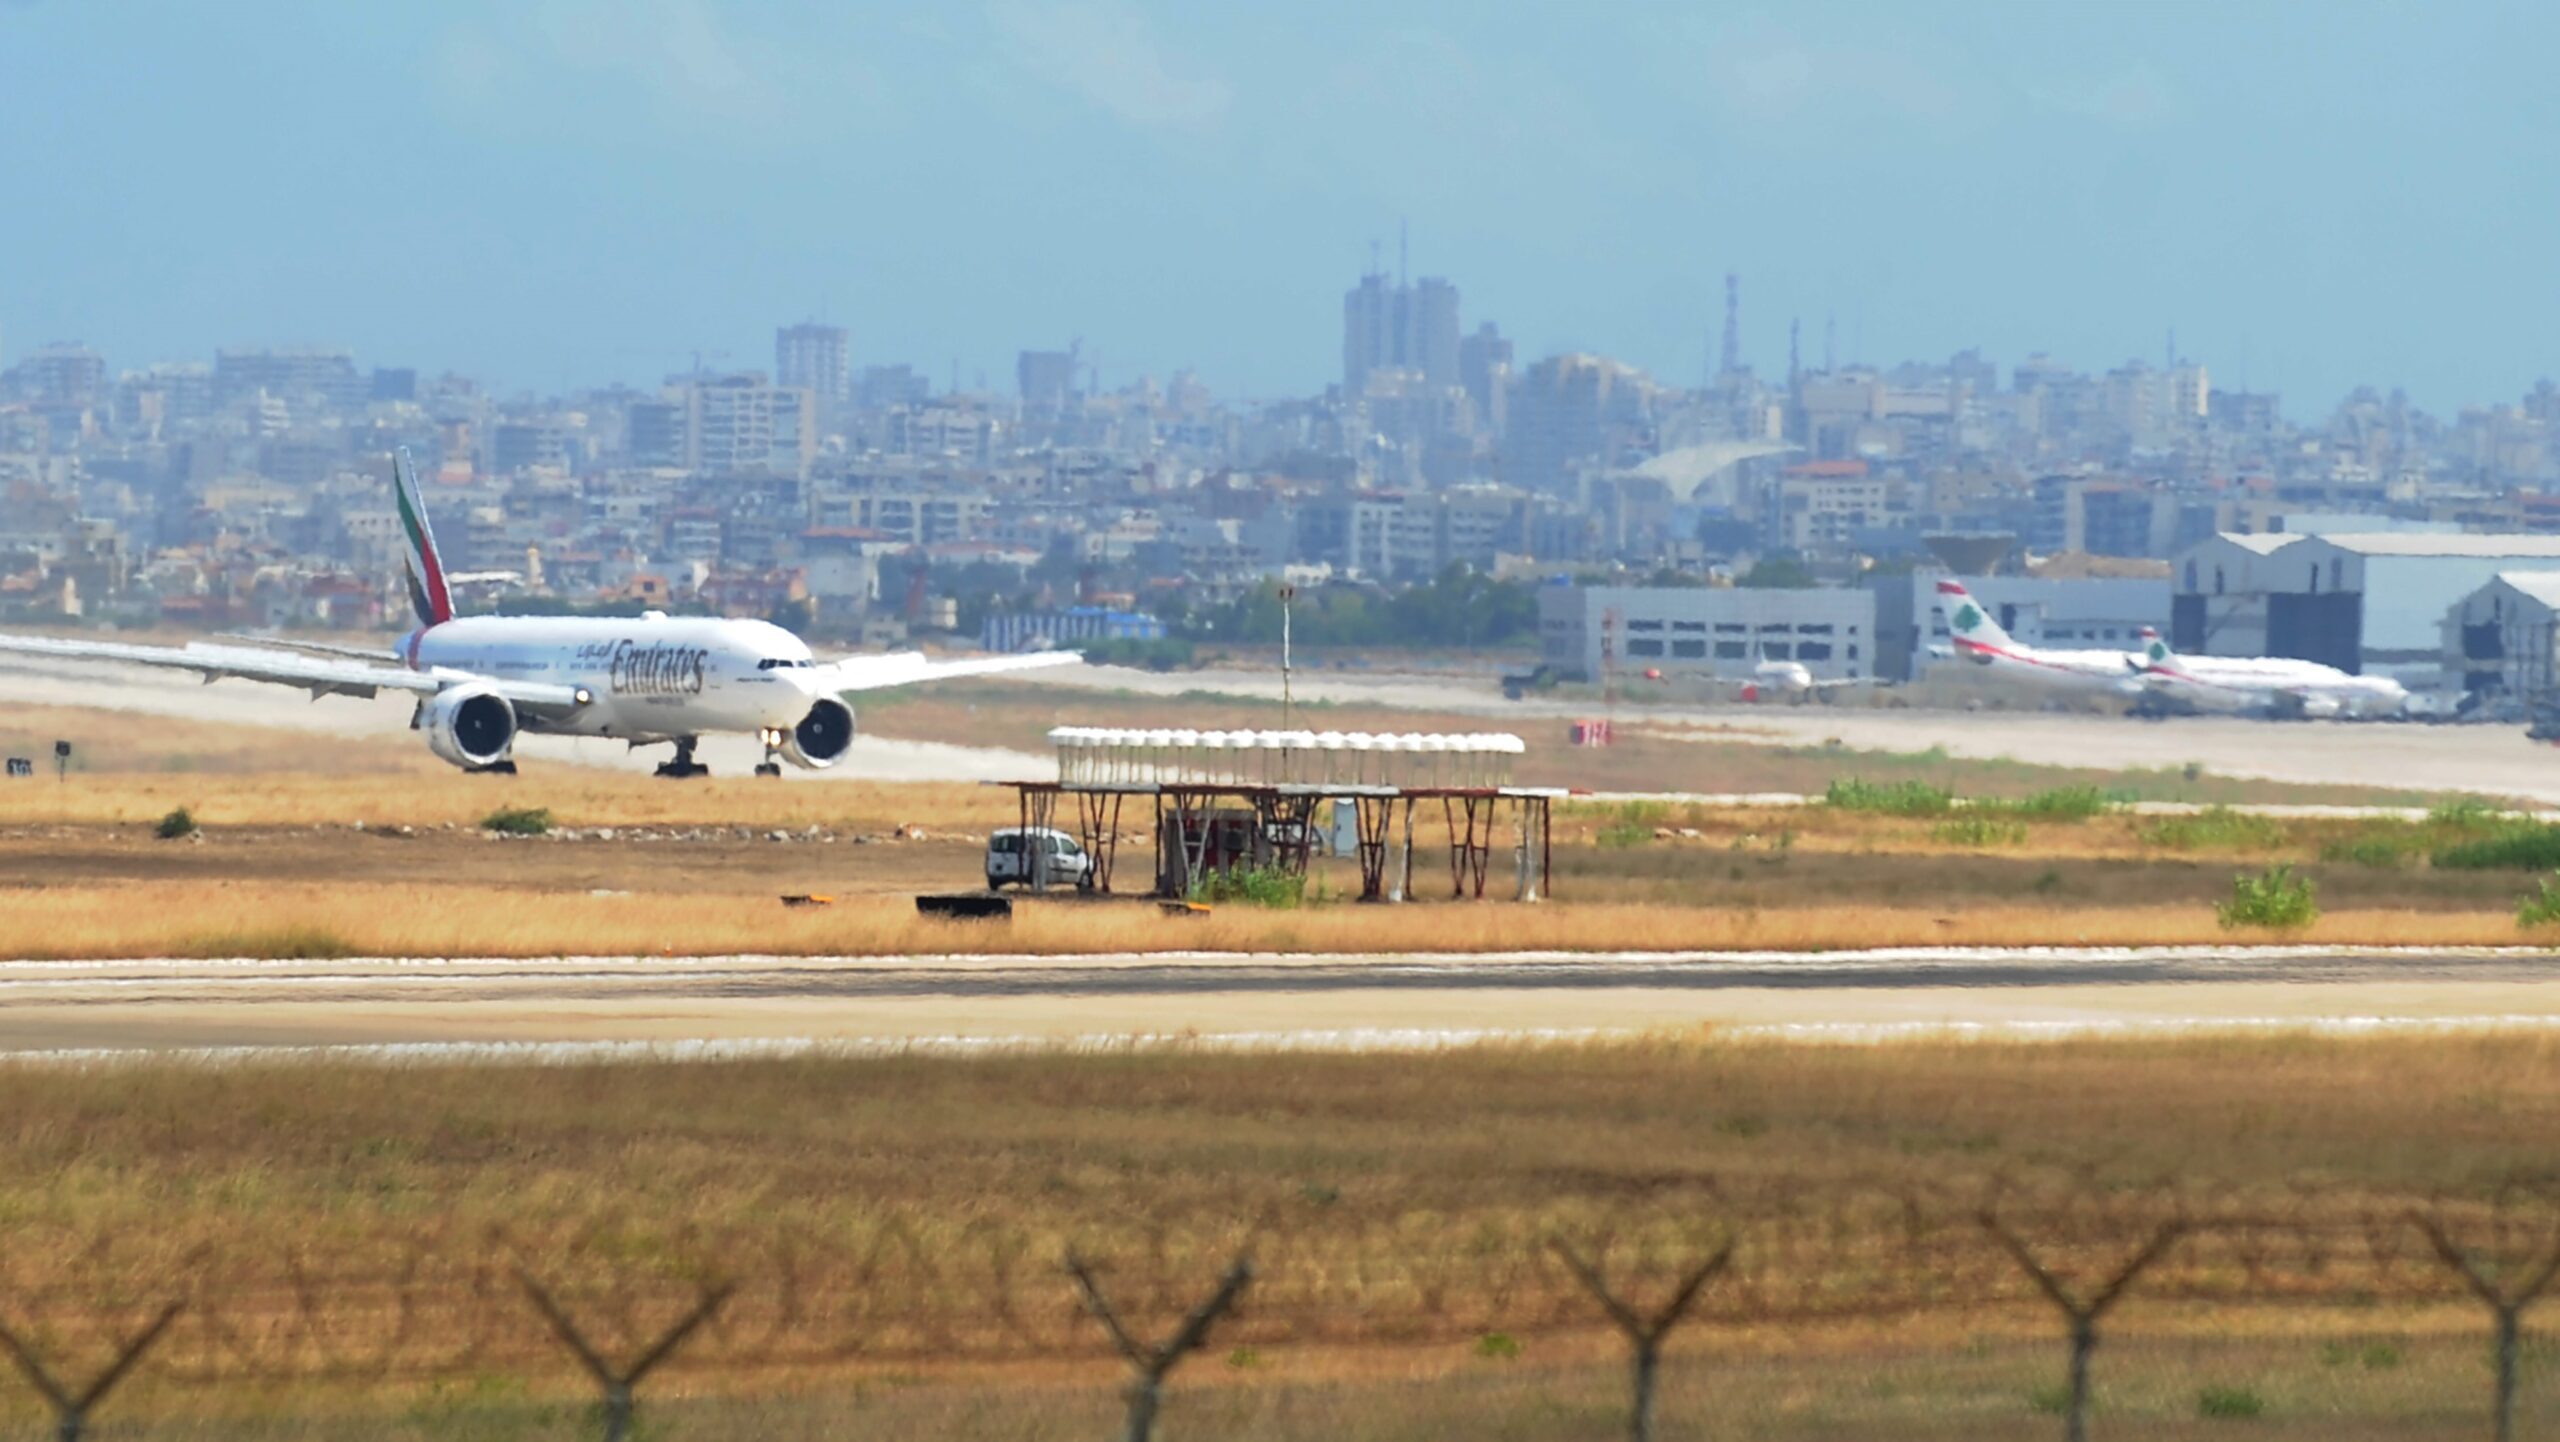 GPS jamming spreads in Lebanon, civil aviation caught in the electronic crossfire